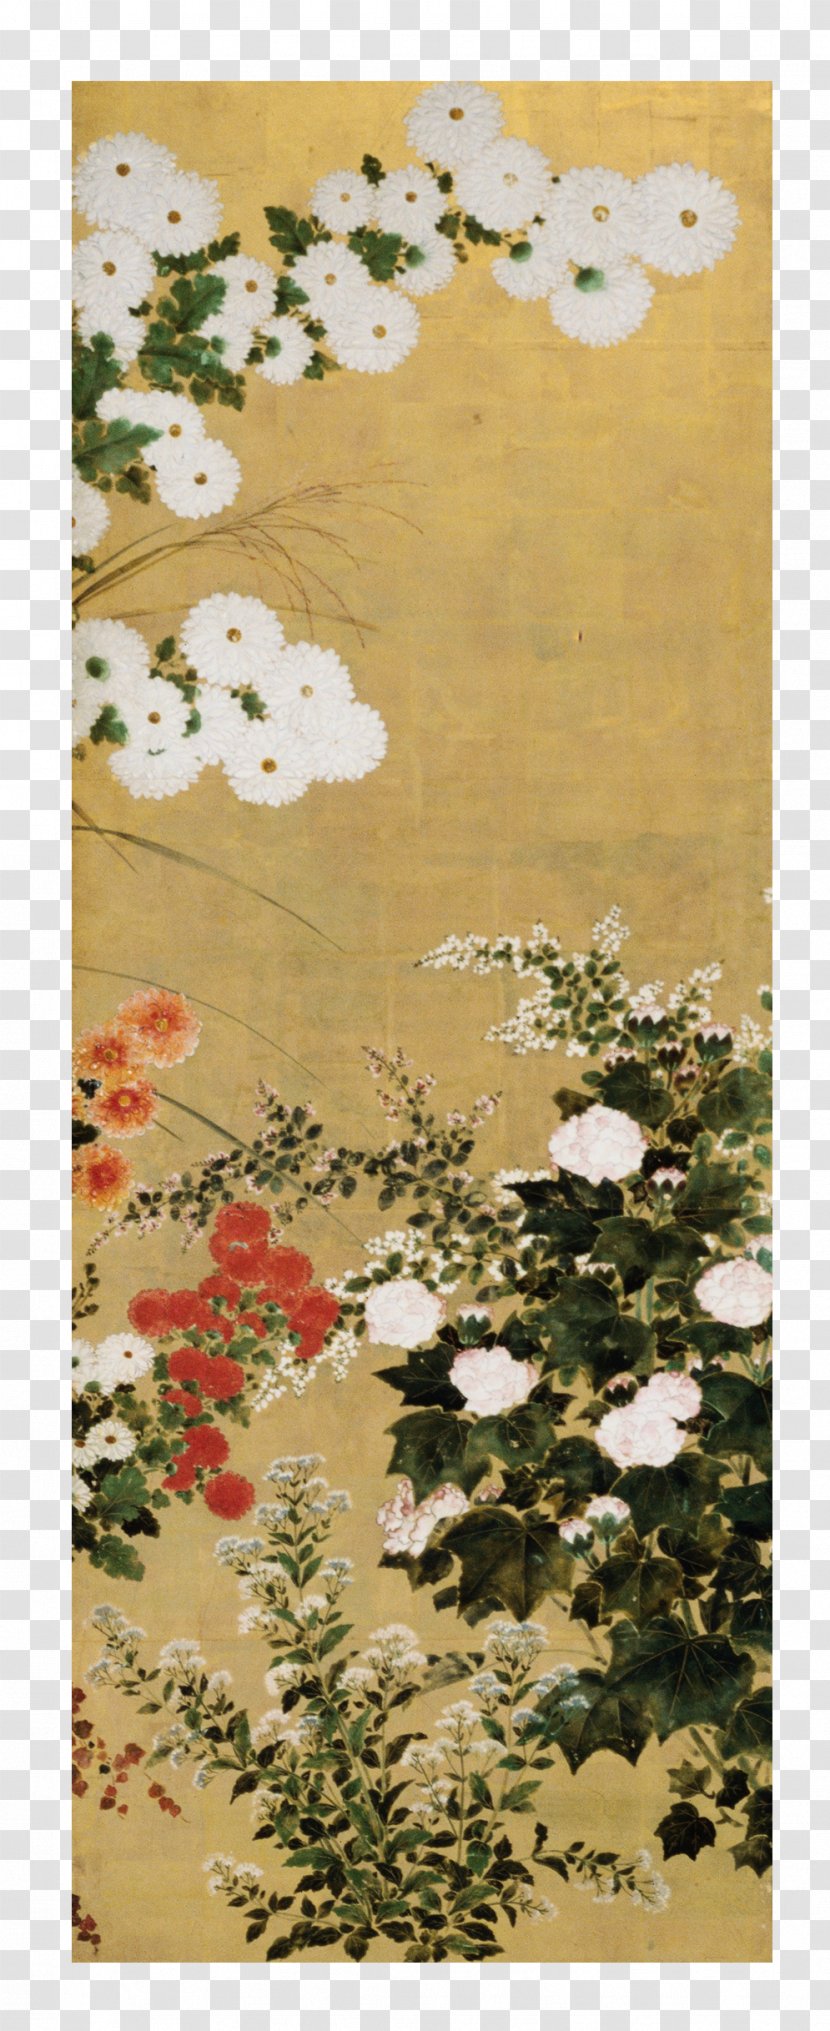 Japan Painting Drawing - Artwork - Japanese Hand-painted Decorative Patterns Material Transparent PNG